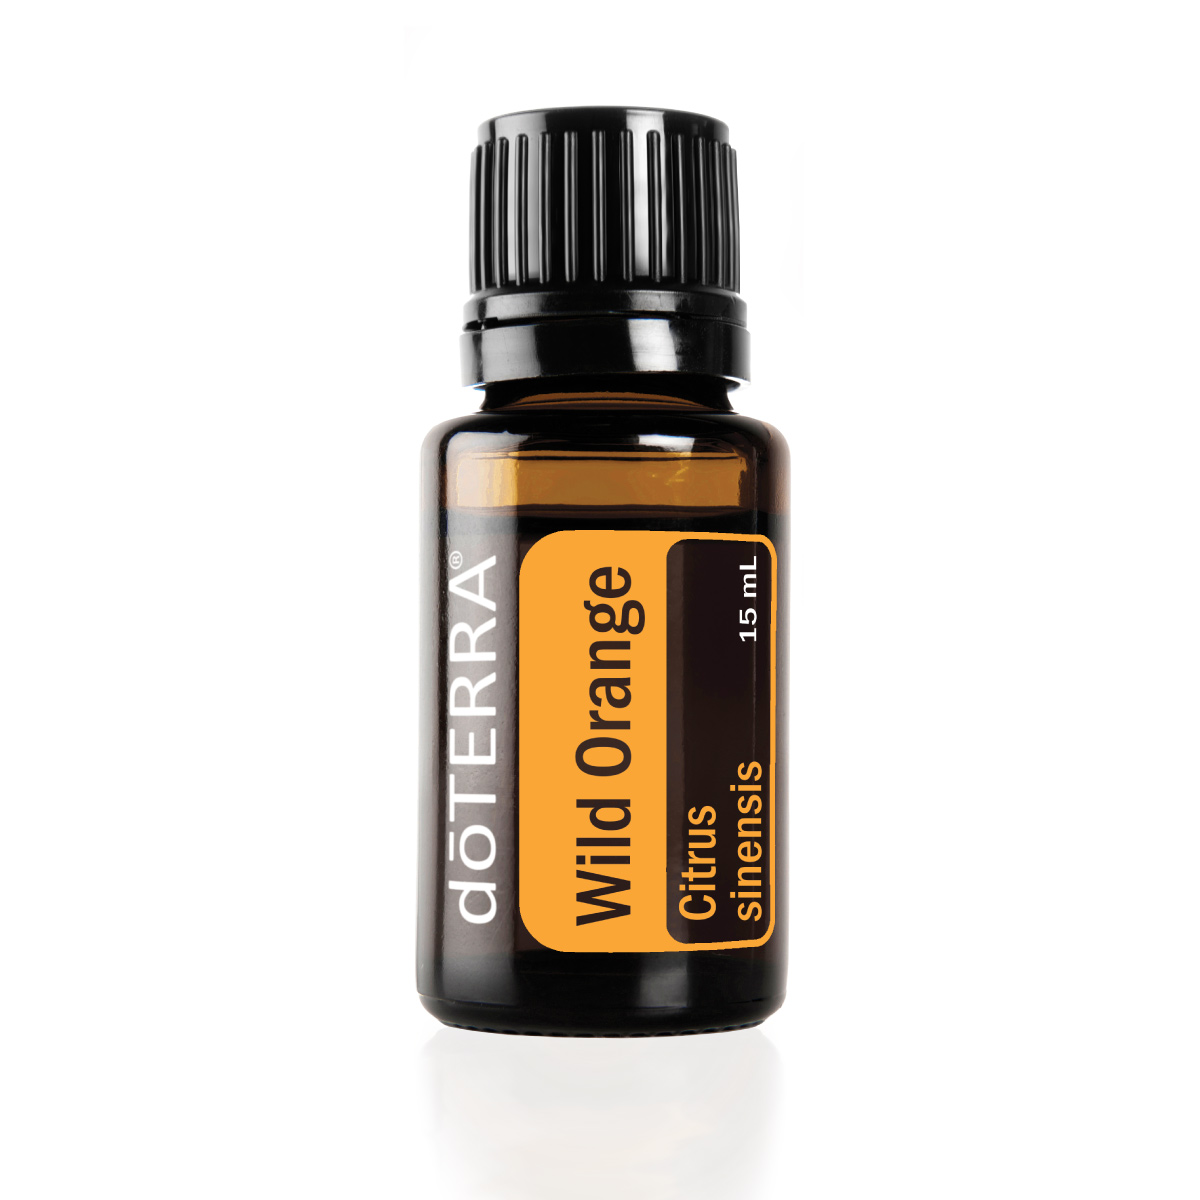 Bottle of doTERRA Wild Orange oil. What is Wild Orange oil good for? Wild Orange essential oil can be used to cleanse surfaces, support a healthy immune system, and create an uplifting environment.